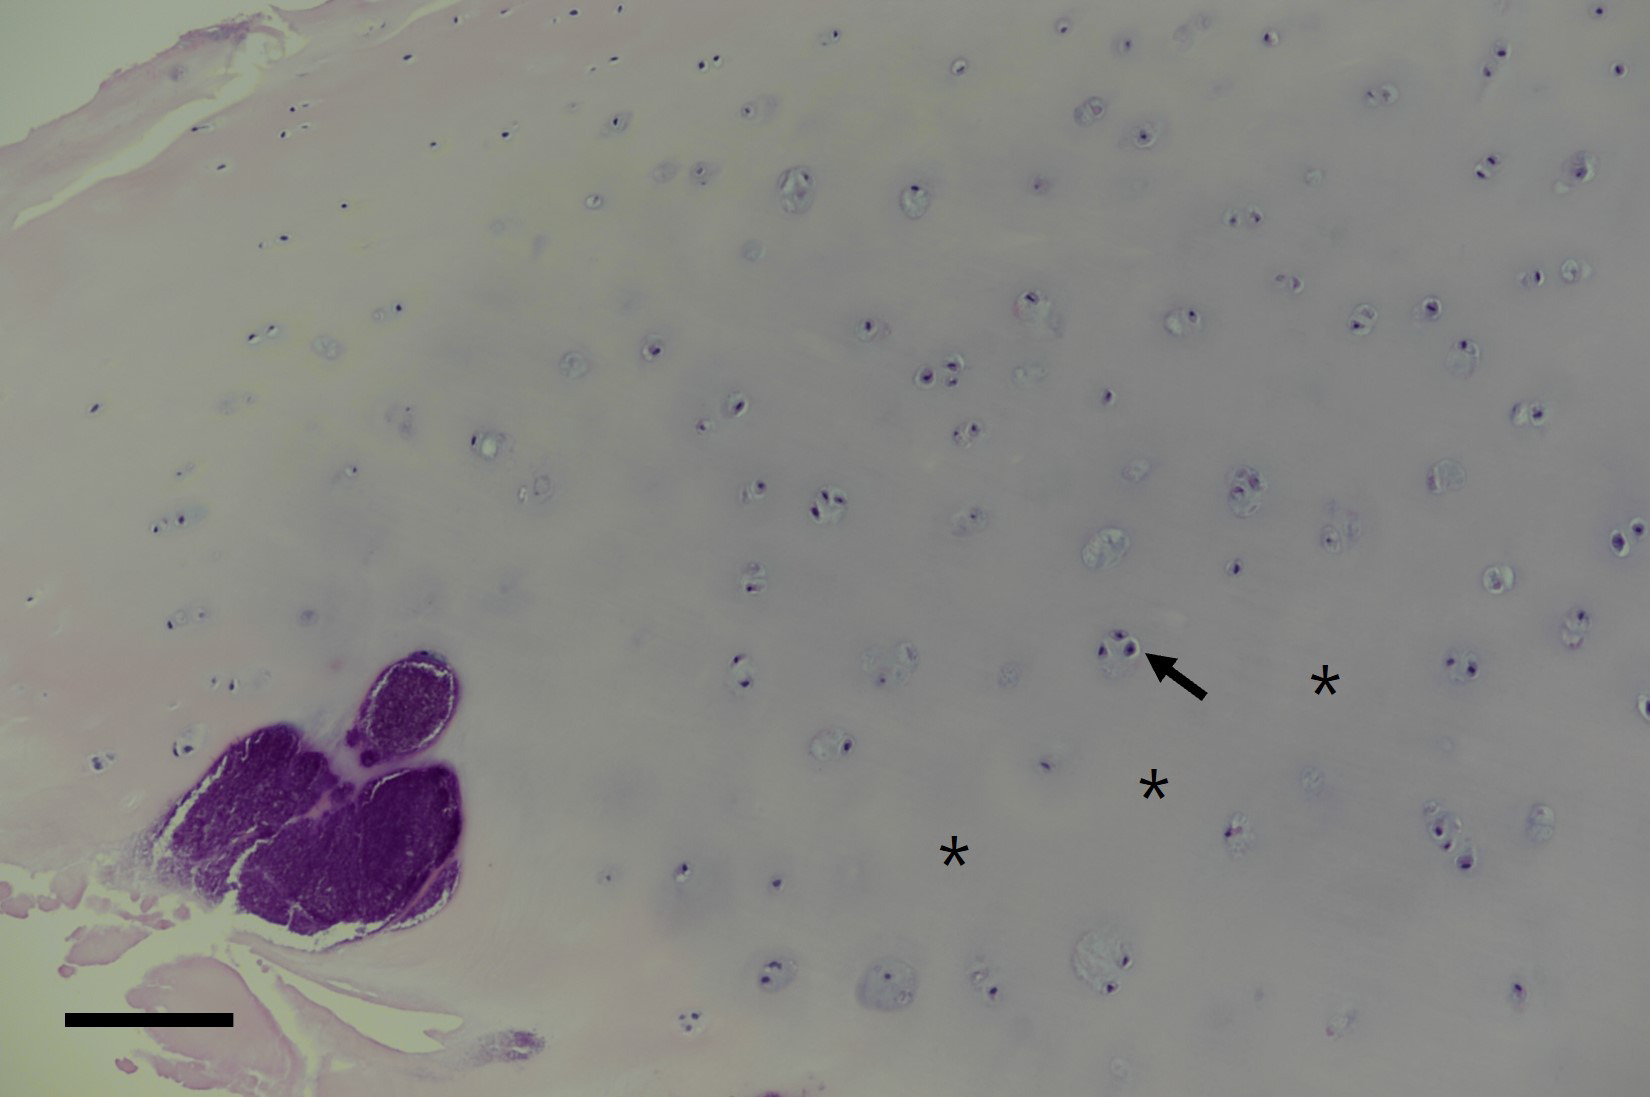 Fig. 2 
          Representative of the histological examination of a detached lesion cartilage. Hematoxylin and eosin staining was performed to check cell viability. Live chondrocytes within the lacunae (arrow) and the hyaline matrix (asterisk) were confirmed in all specimens (n = 32) (scale bars 200 μm).
        